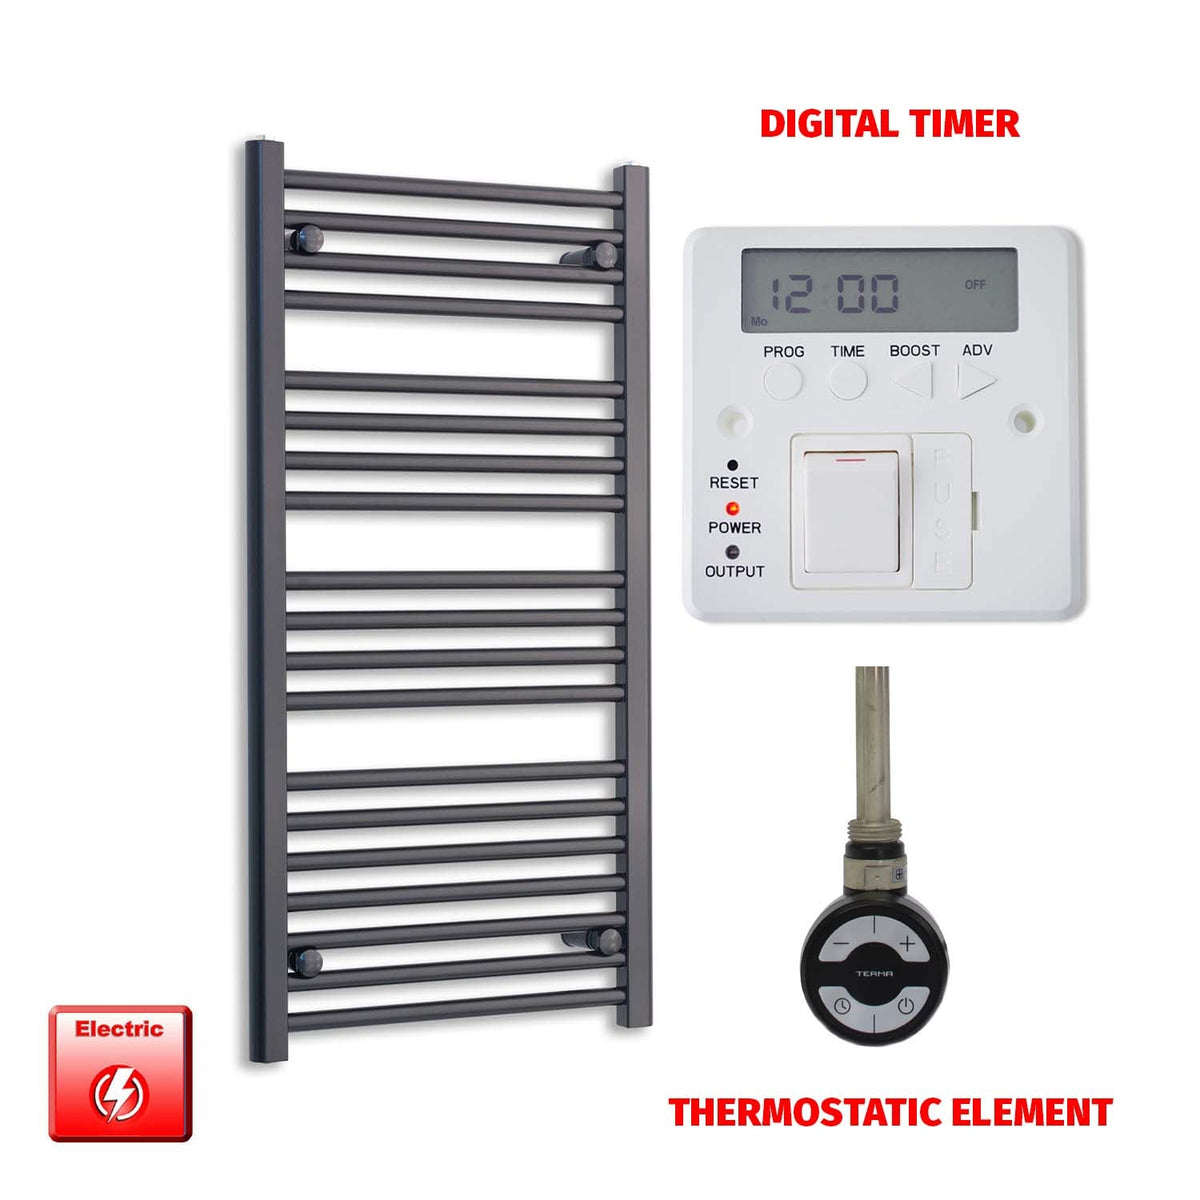 1000 x 600 Flat Black Pre-Filled Electric Heated Towel Radiator HTR MOA Thermostatic Digital Timer